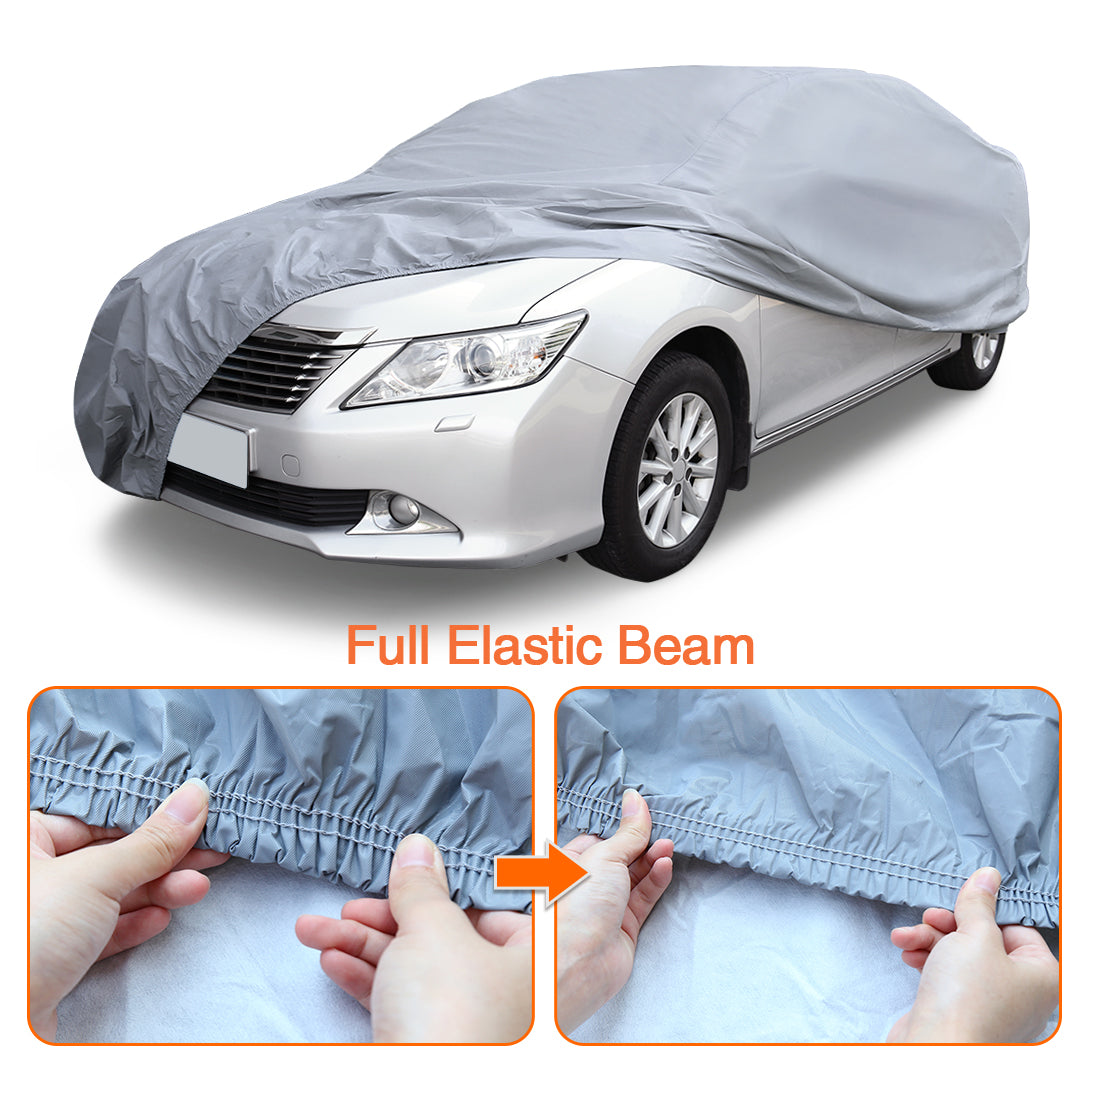 uxcell Uxcell 3XXL+ PEVA Car Cover Outdoor Waterproof Breathable Snow Heat Resistant 570 x 190 x 160cm